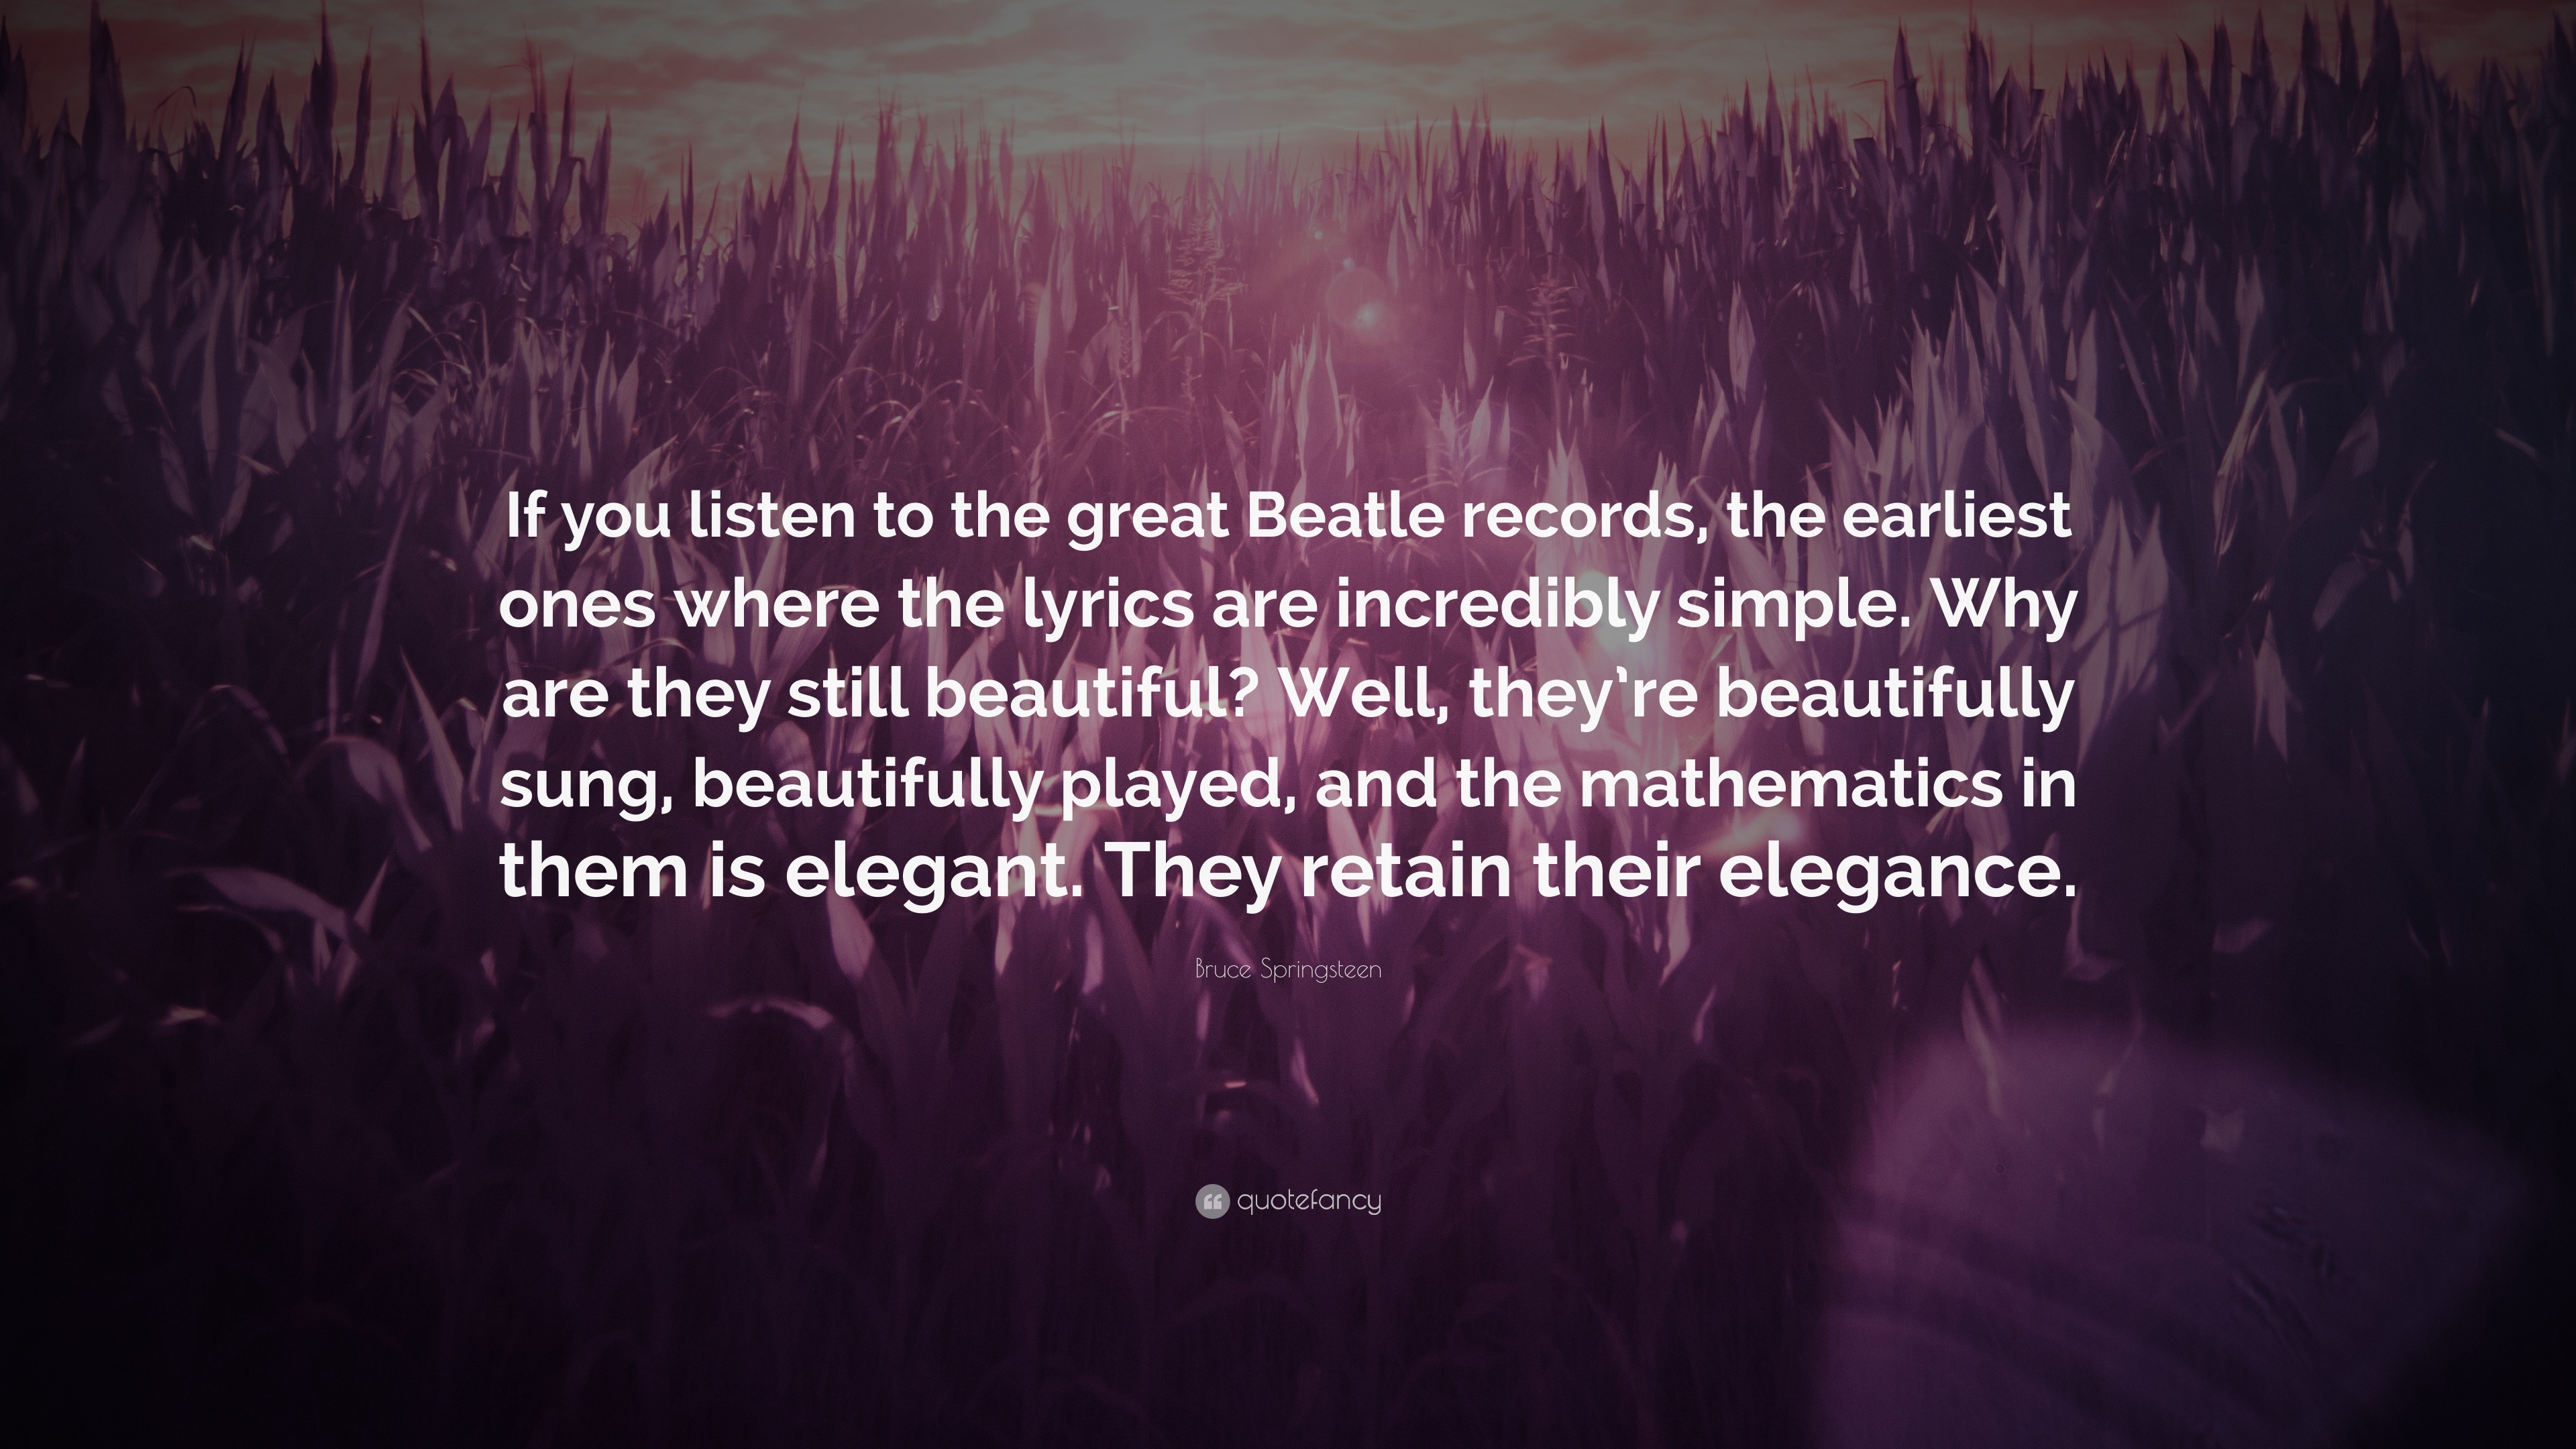 Bruce Springsteen Quote: “If you listen to the great Beatle